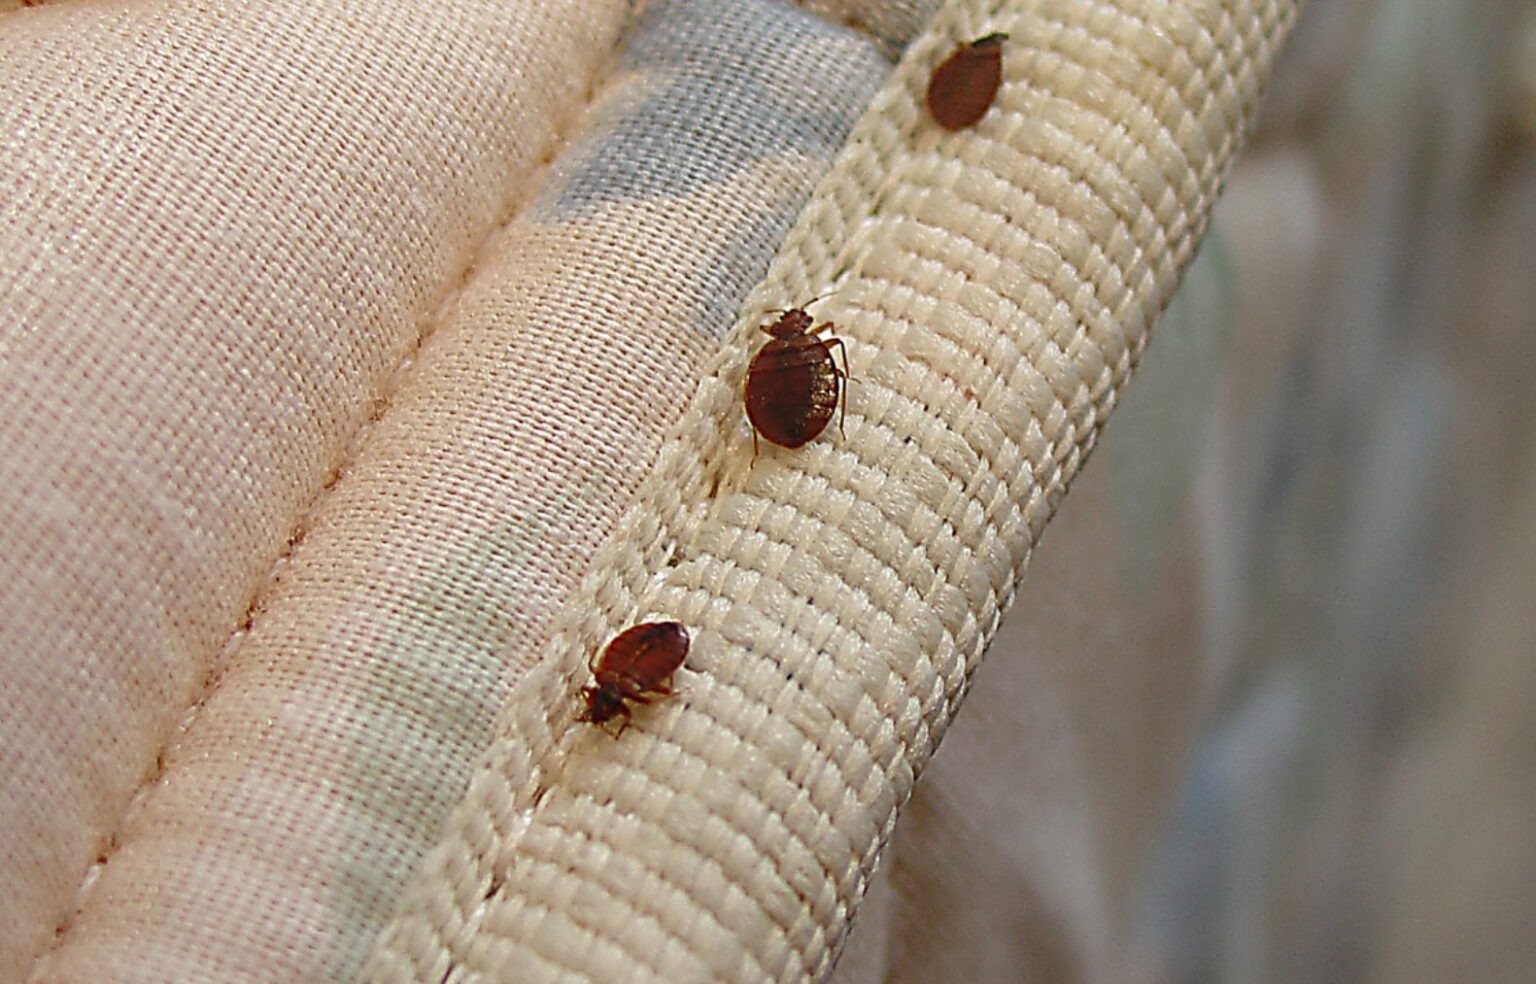 do bed bugs hide in mattresses